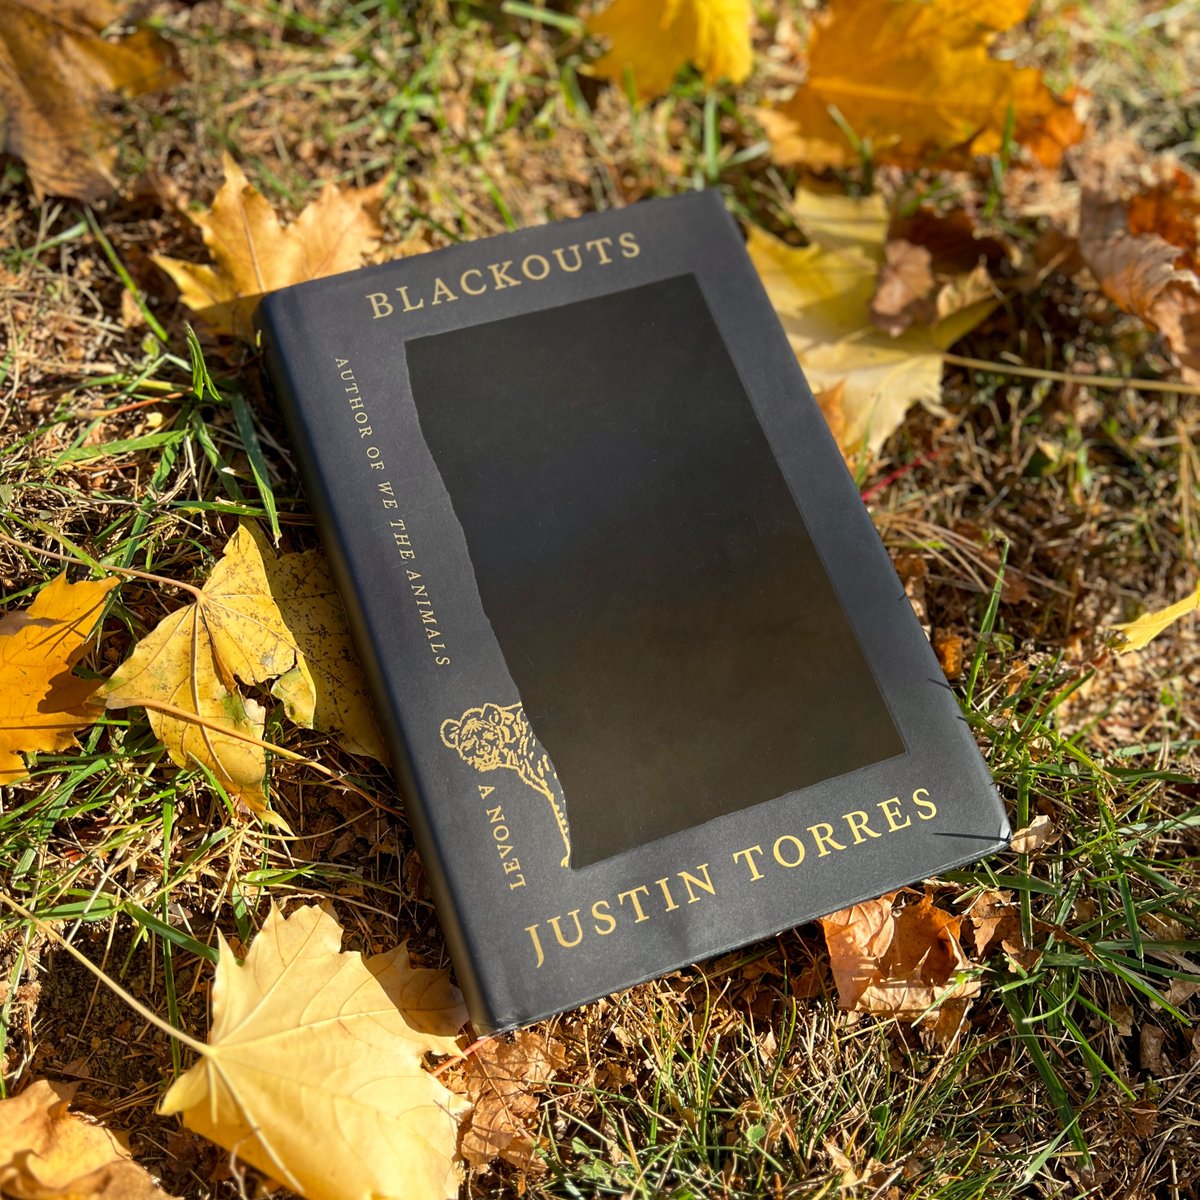 BLACKOUTS by Justin Torres is the winner of the 2023 National Book Award for Fiction! 📚🏆🌟 We are beyond thrilled for this extraordinary work of creative imagination that shines a light on the world we inhabit. CONGRATULATIONS to Justin Torres!